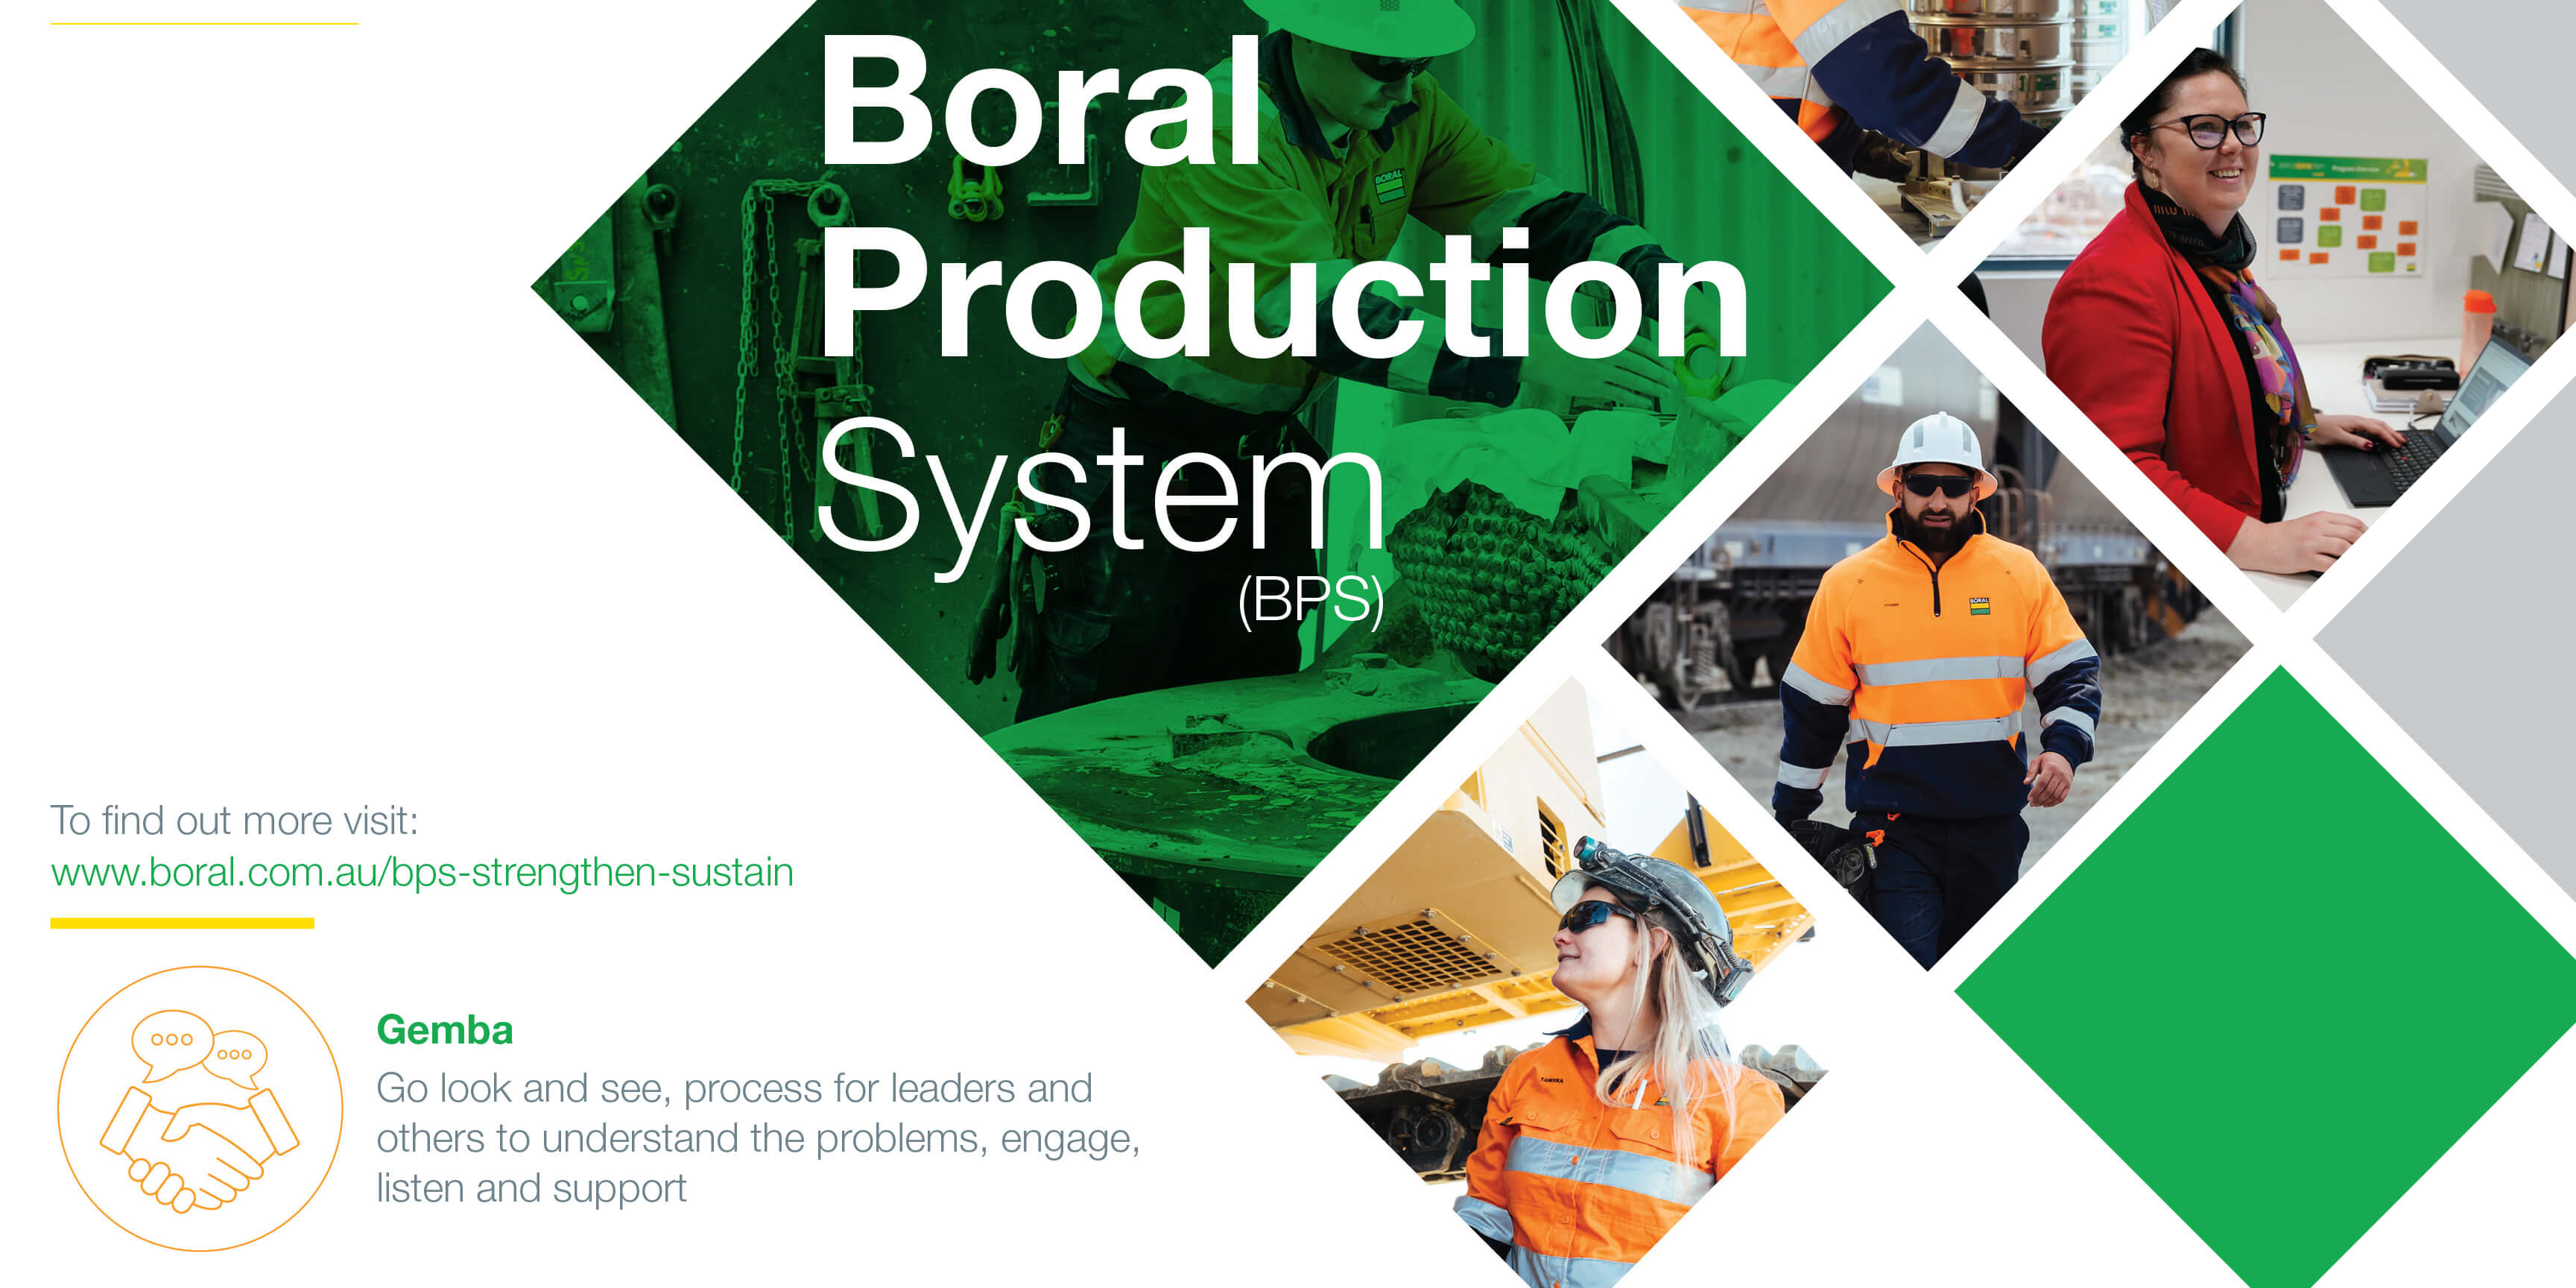 Boral BPS Strengthen & Sustain Campaign